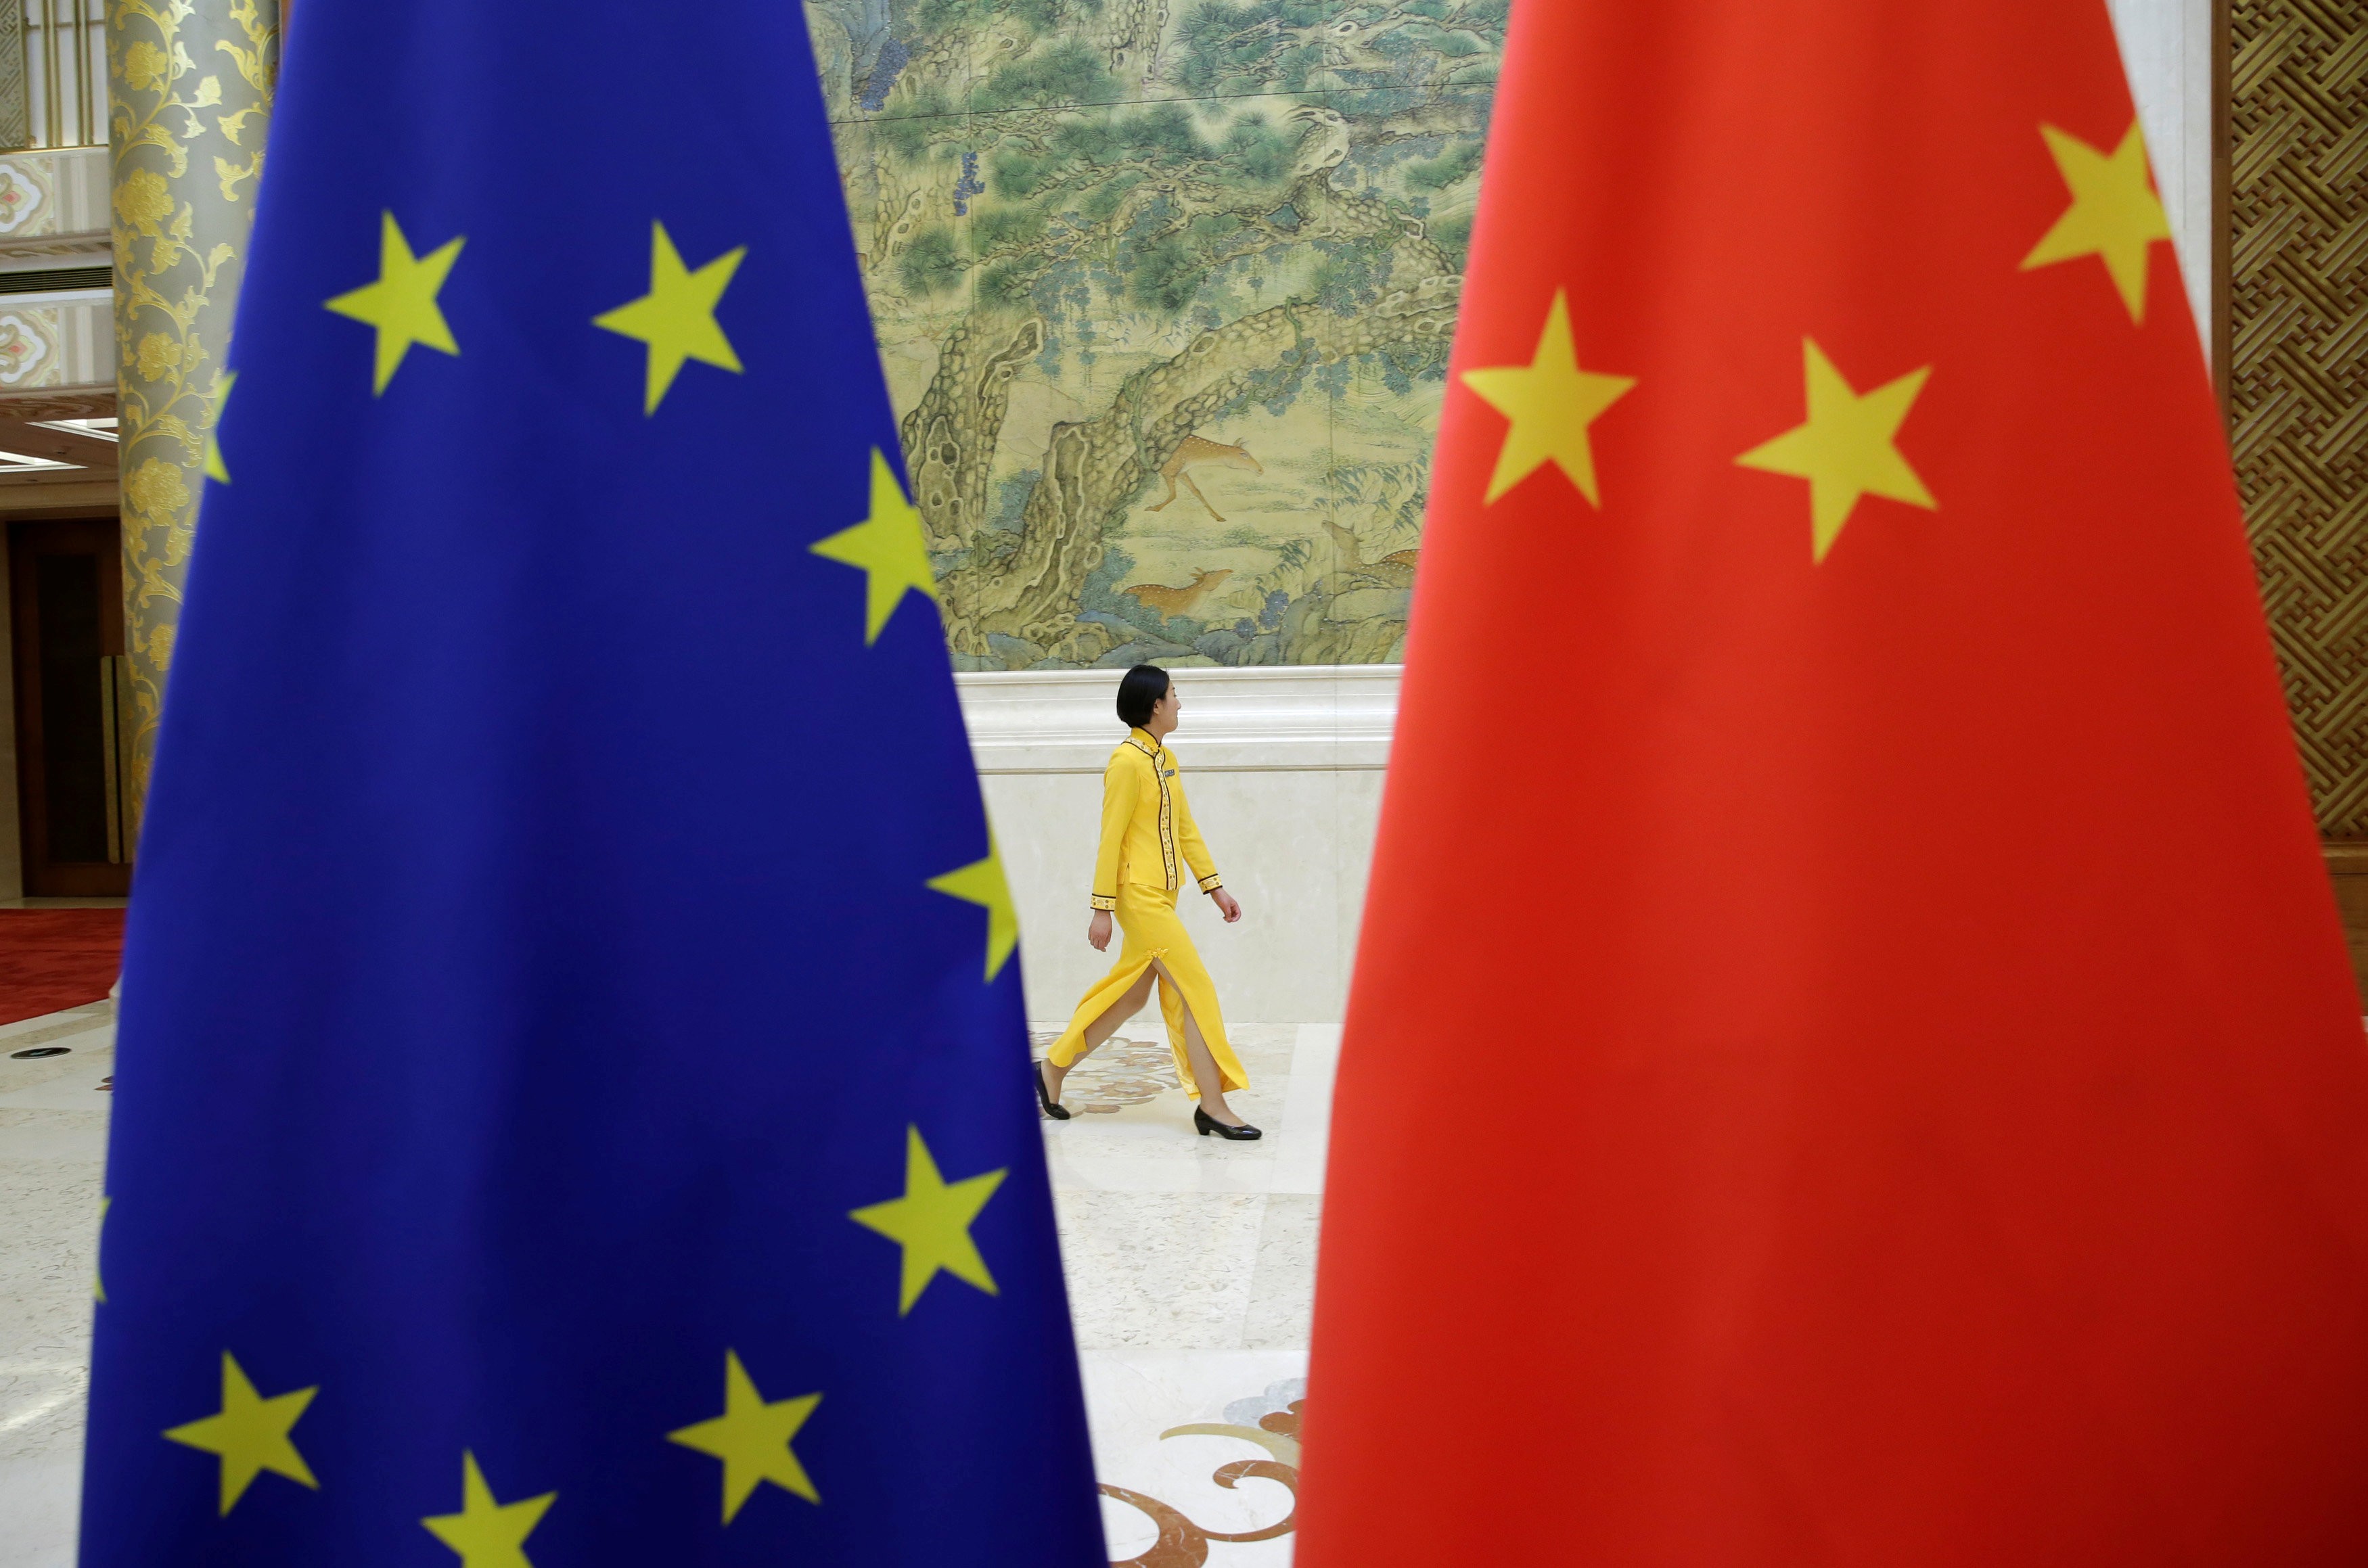 An attendant walks past European Union and China flags ahead of the EU-China High-Level Economic and Trade Dialogue at the Diaoyutai State Guesthouse in Beijing on June 25. Photo: Reuters